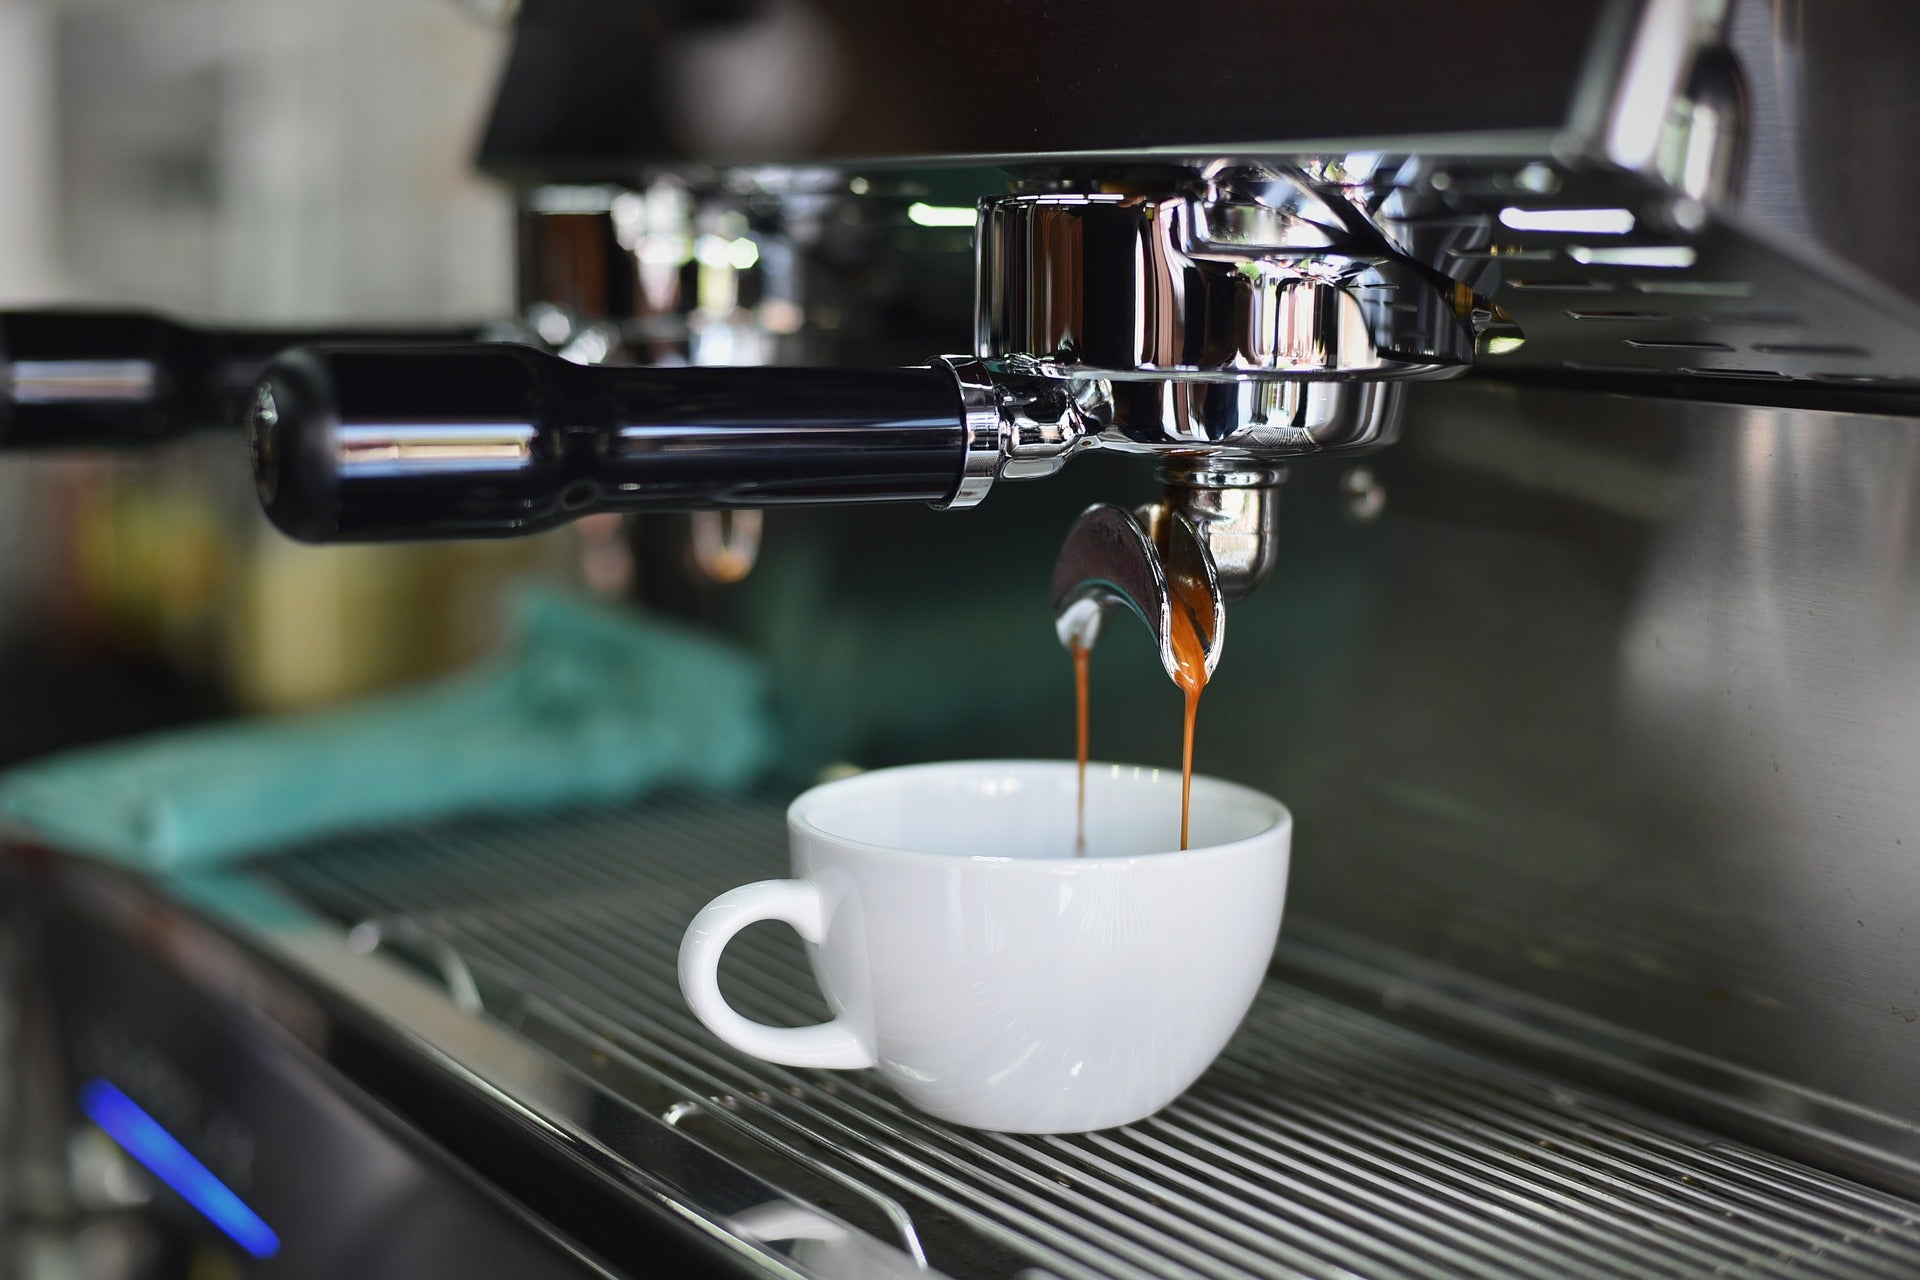 illycaffè boosts UK presence with new coffee bar at Eataly London